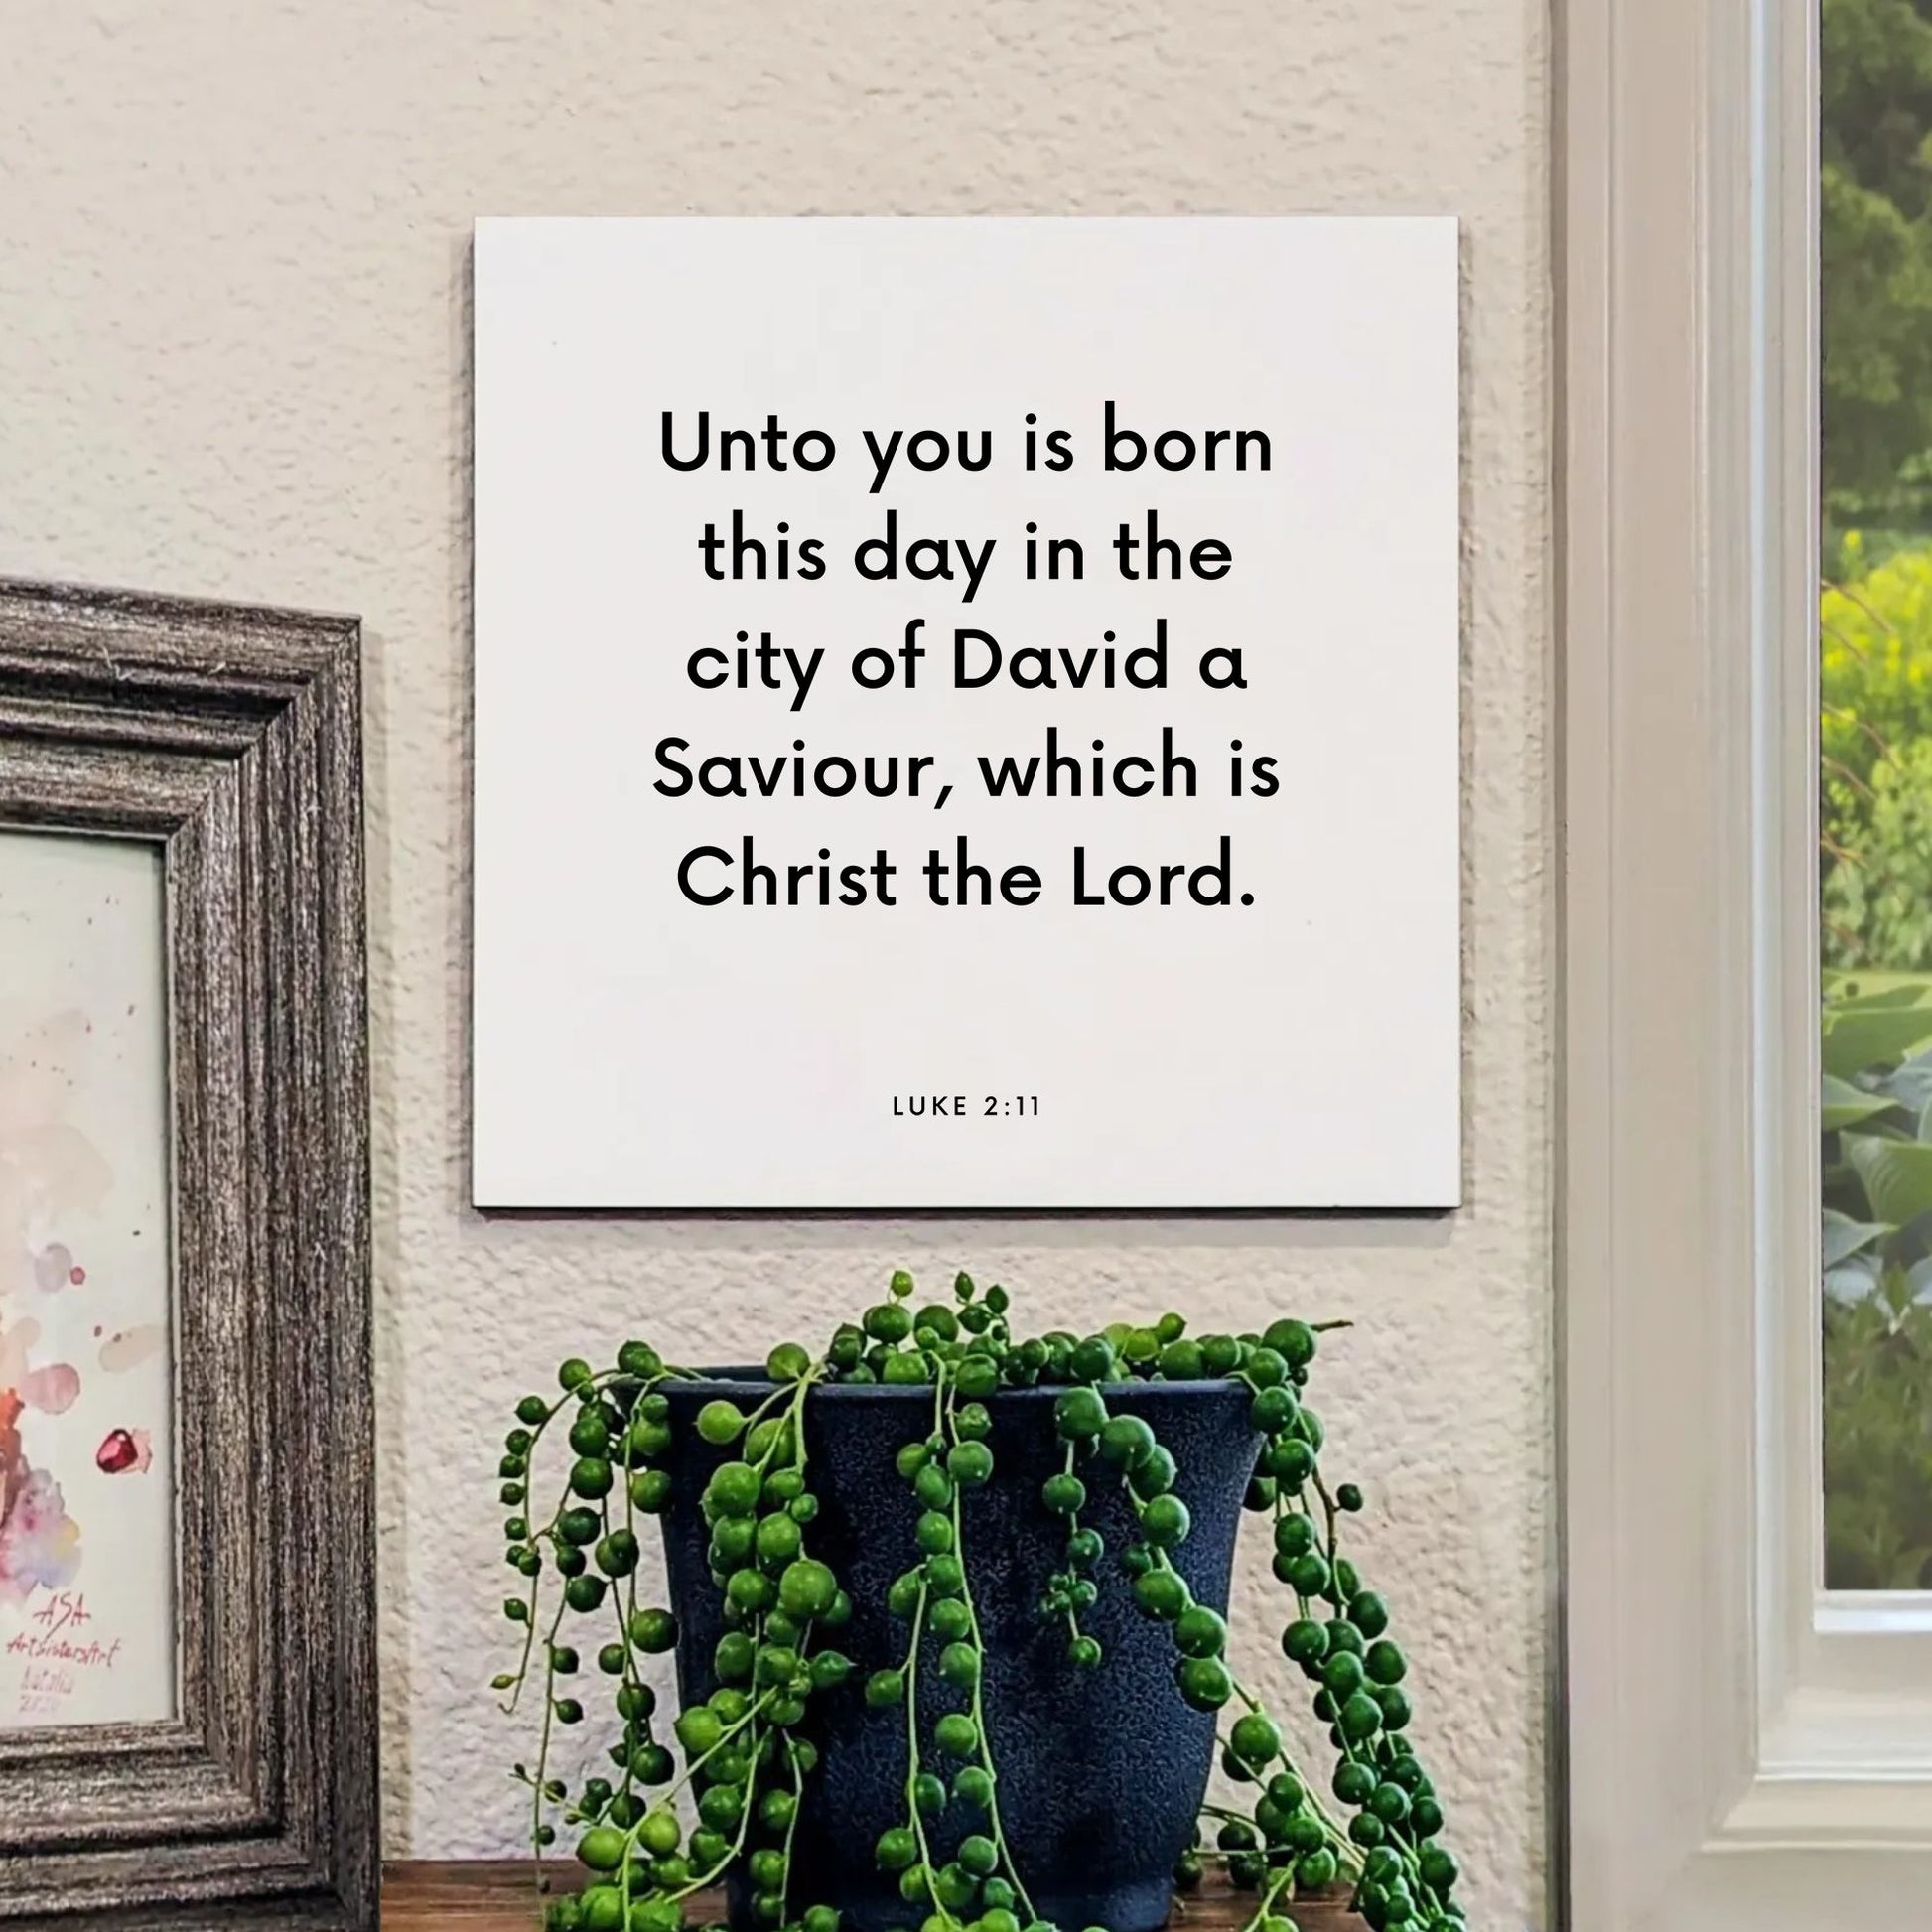 Window mouting of the scripture tile for Luke 2:11 - "Unto you is born this day in the city of David a Saviour"